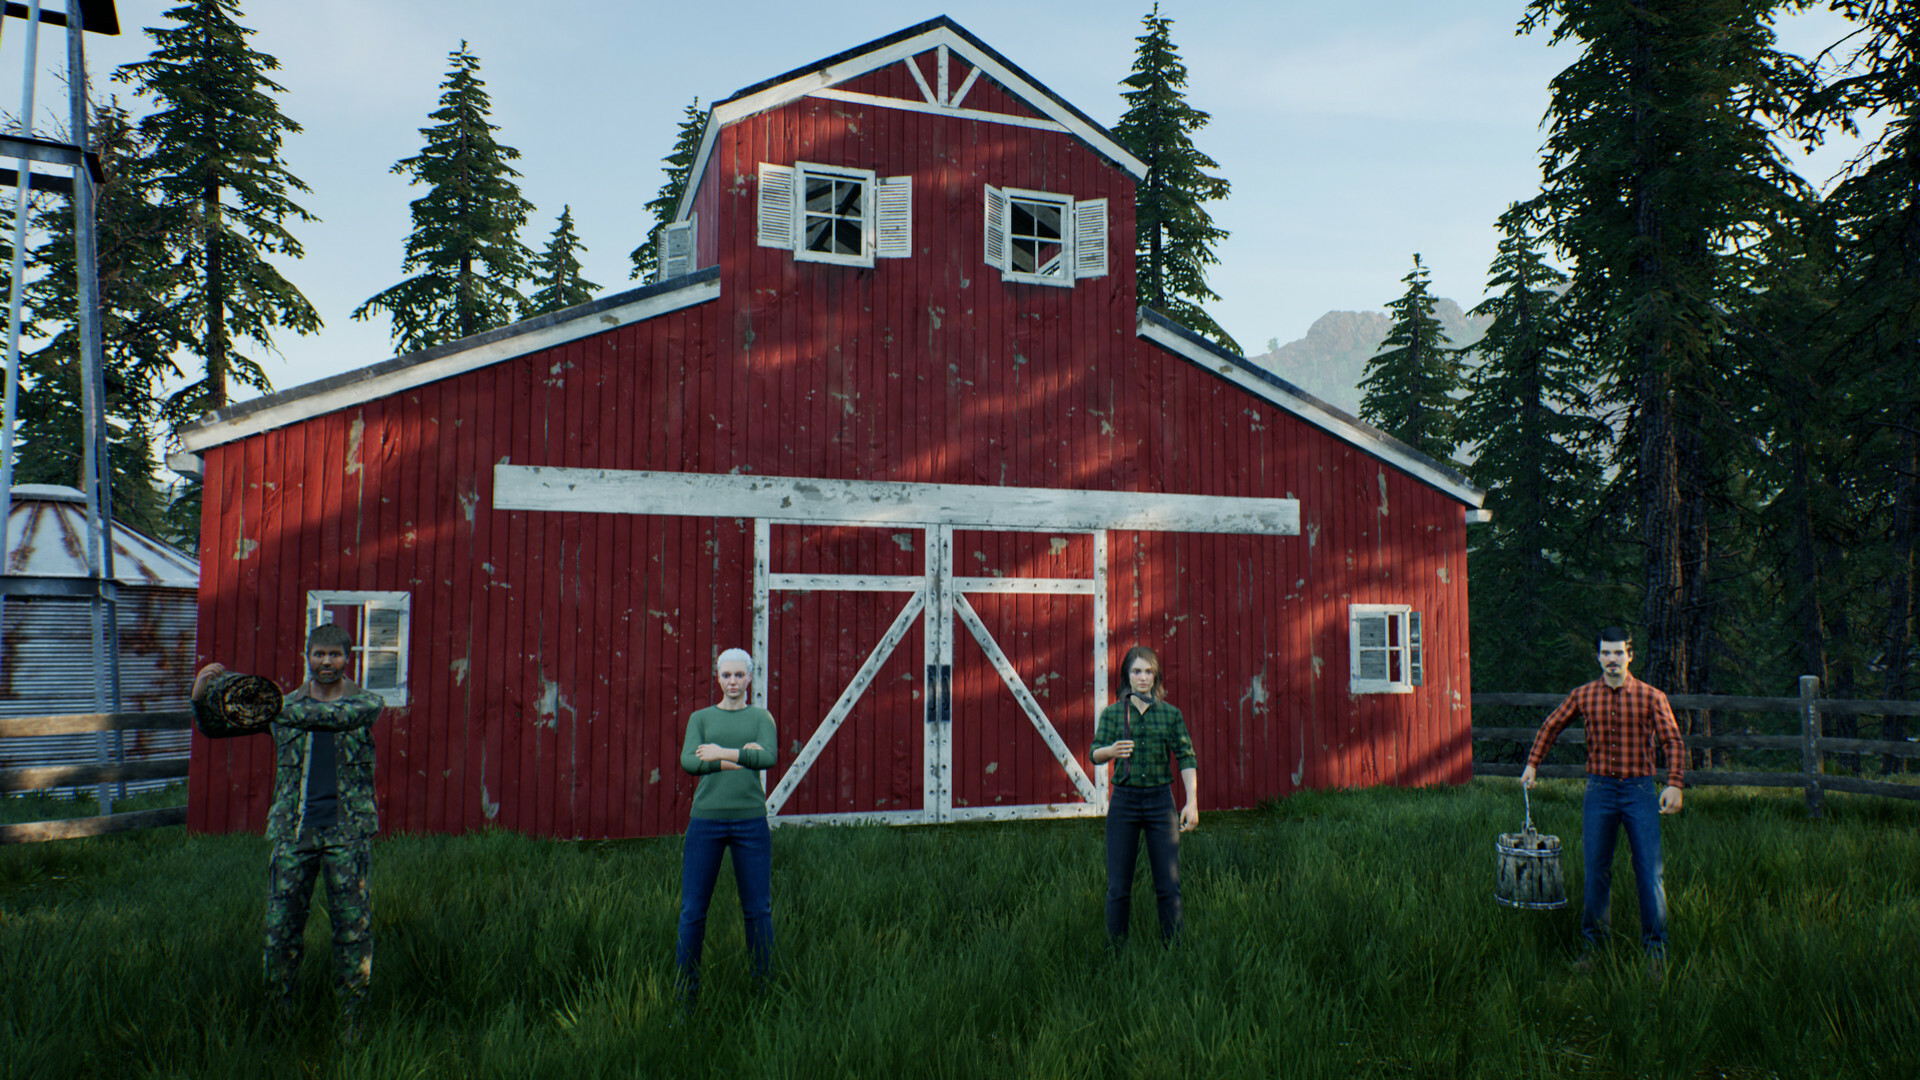 Ranch Simulator NEW UPDATE FIRST LOOK 